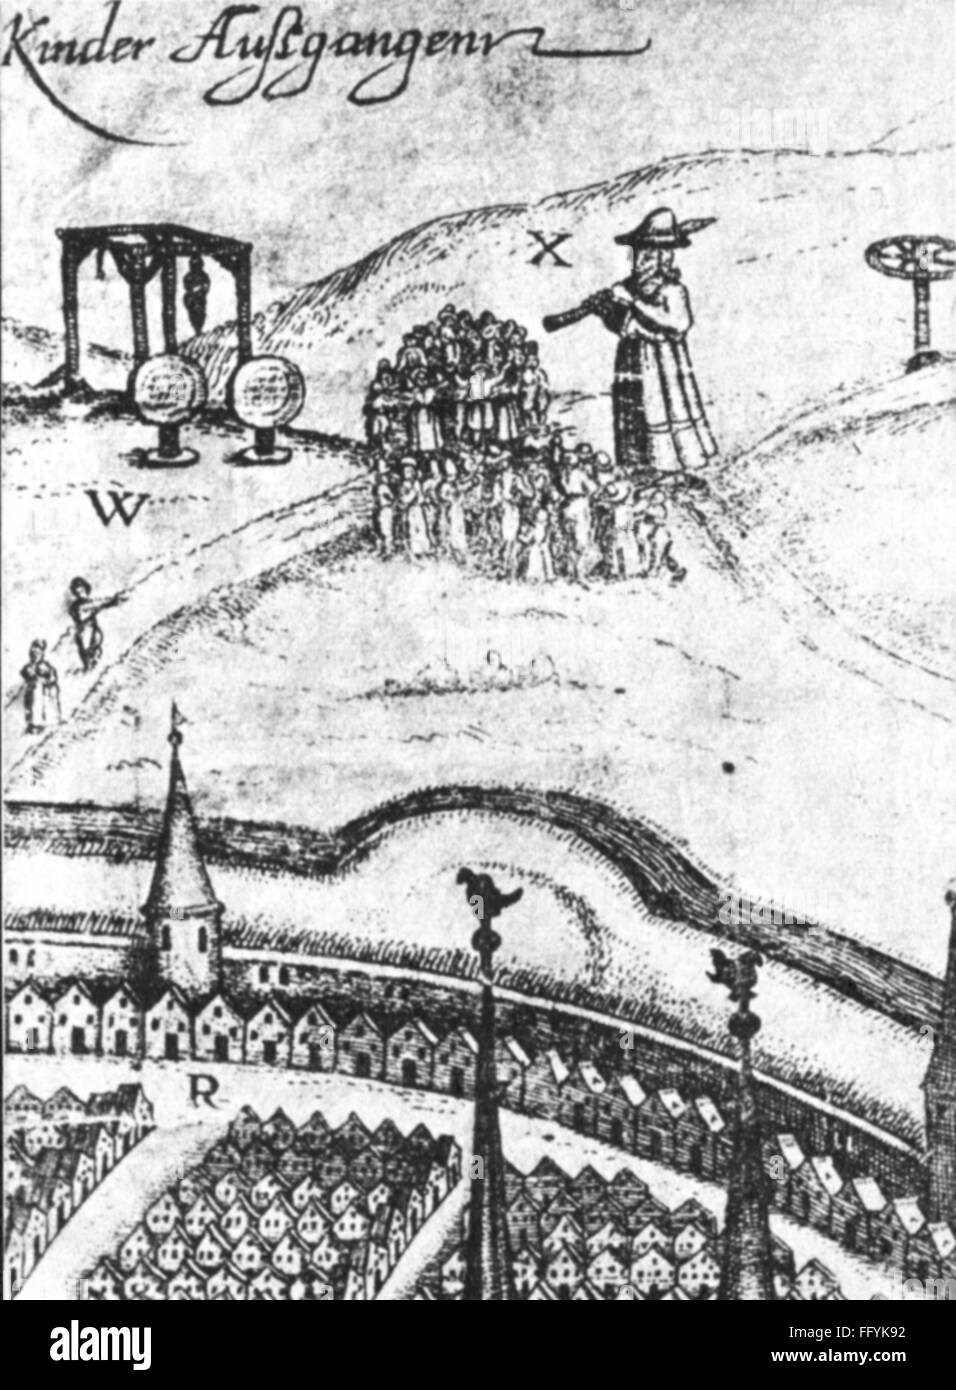 literature, legends, pied piper of Hamelin, 1284, detail of a city view of Hamelin, copper engraving, 1622, 13th century, Middle Ages, medieval, mediaeval, 17th century, graphic, graphics, Northern Germany, the North of Germany, Lower Saxony, saga, sagas, pied piper, musician, musicians, make music, play music, making music, playing music, makes music, plays music, made music, played music, playing, play, departure, move out, moving out, moved out, city view, cityscape, city views, cityscapes, townscape, townscapes, gallows, gibbet, gibbets, legend, le, Artist's Copyright has not to be cleared Stock Photo